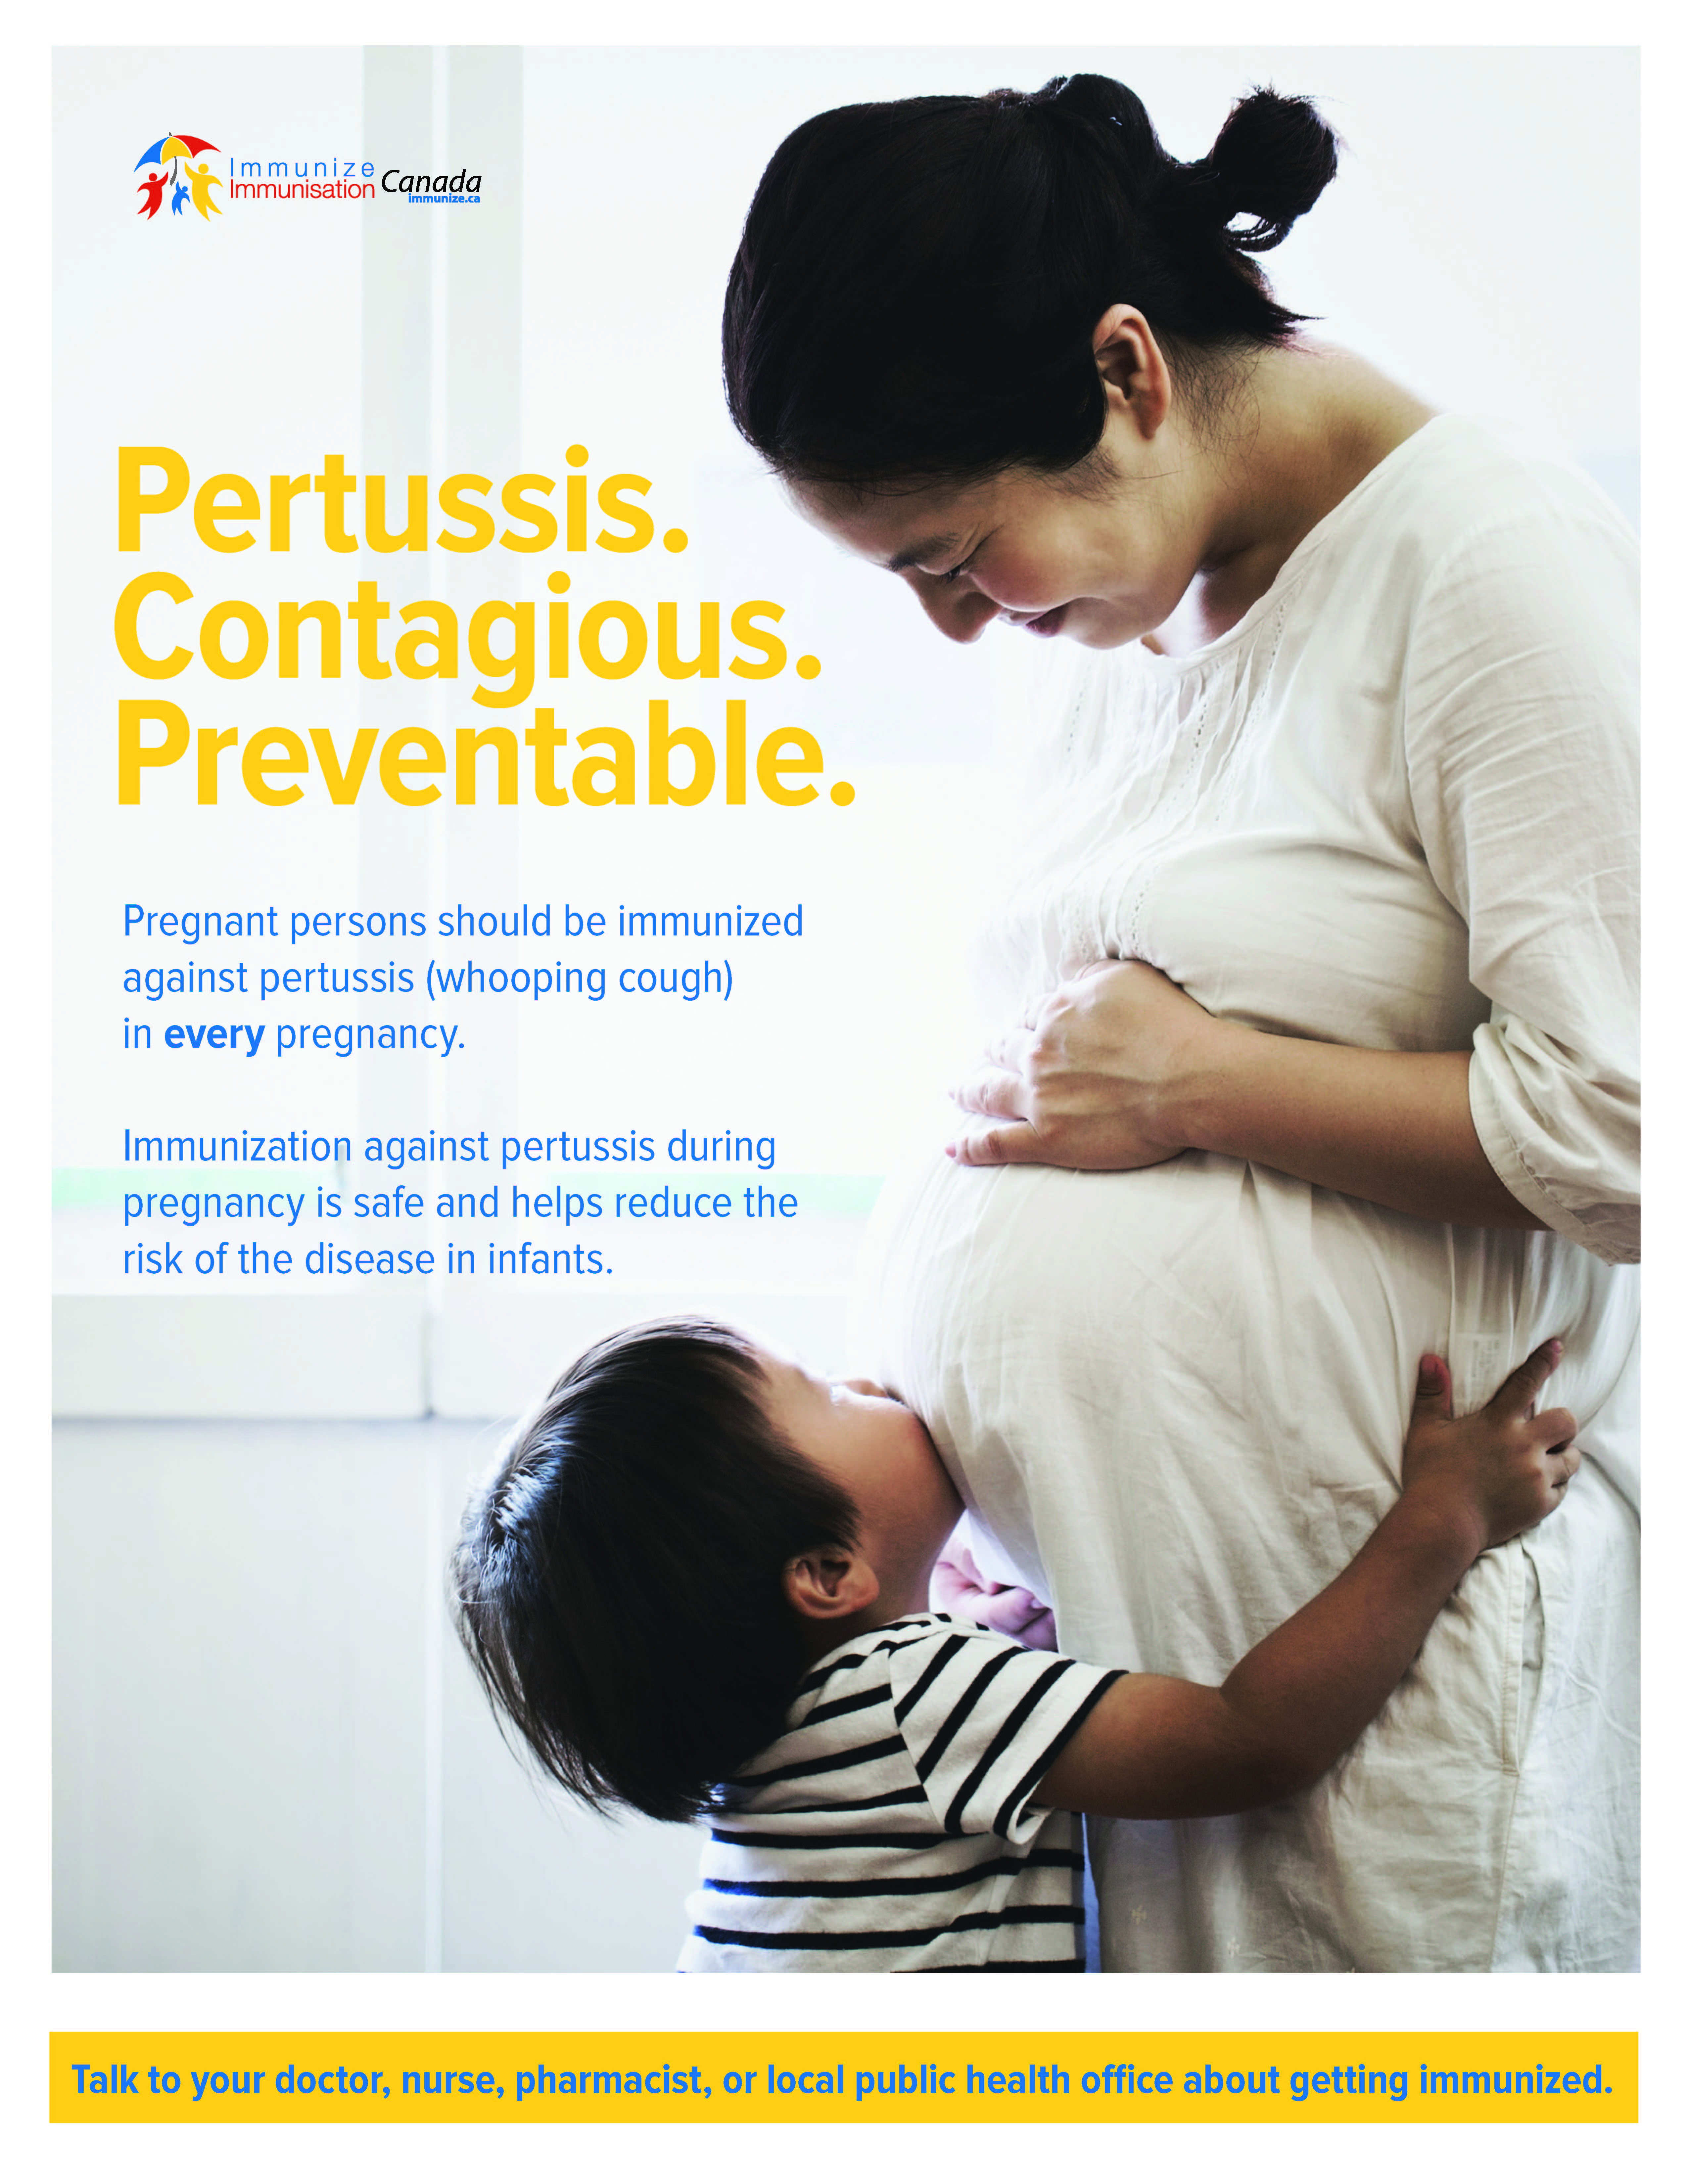 Pertussis. Contagious. Preventable - poster about pertussis (whooping cough) immunization in pregnancy